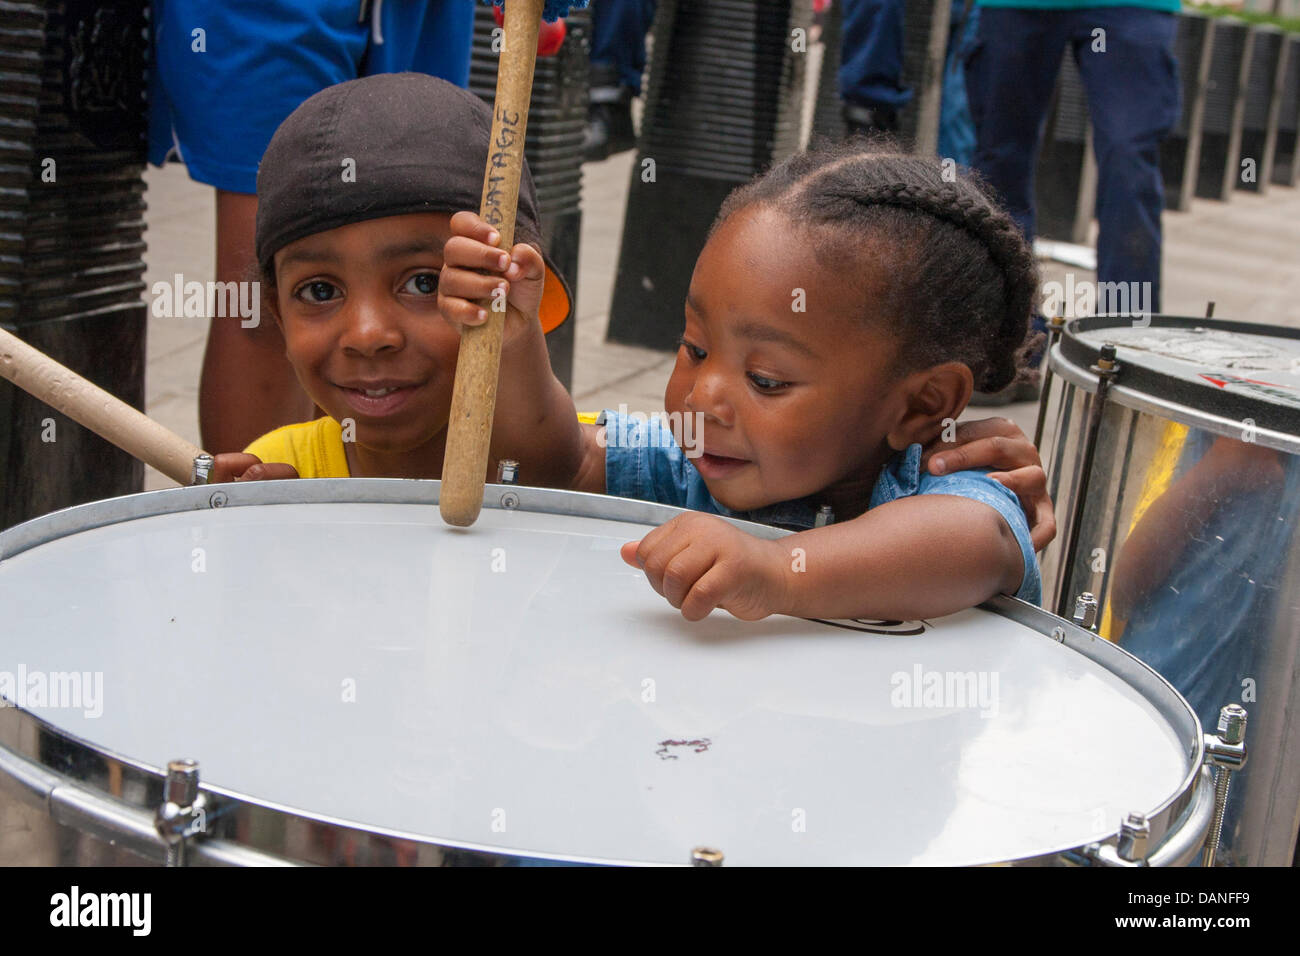 London, UK. 16th July, 2013. Two little children play with a drum as protesters demonstrate outside the US embassy in London against the acquittal of George Zimmerman who shot 17 year-old Trayvon Martin in Florida. Credit:  Paul Davey/Alamy Live News Stock Photo